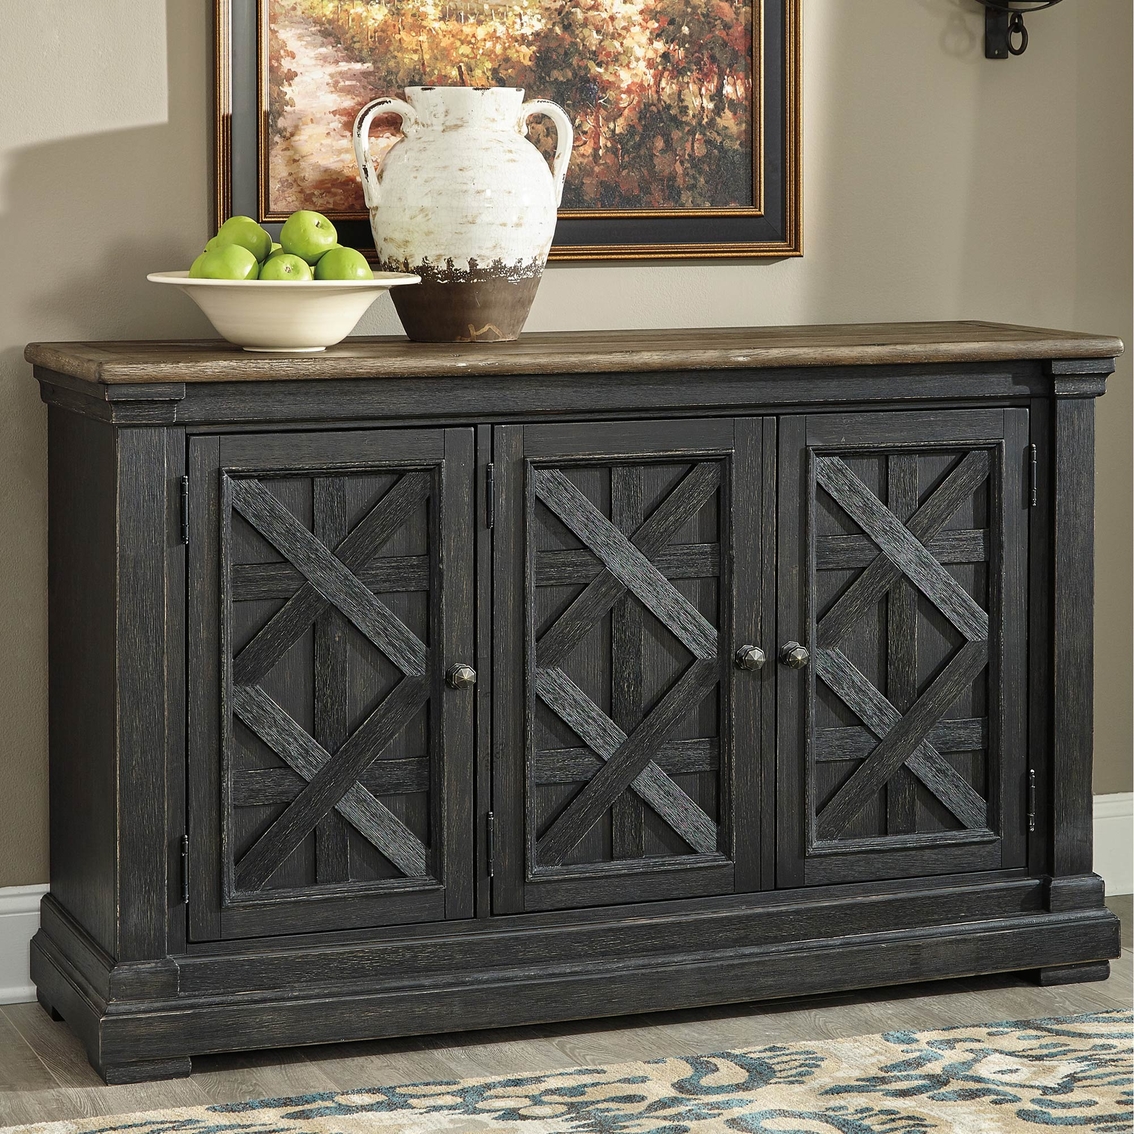 Signature Design by Ashley Tyler Creek Dining Room Server - Image 2 of 3